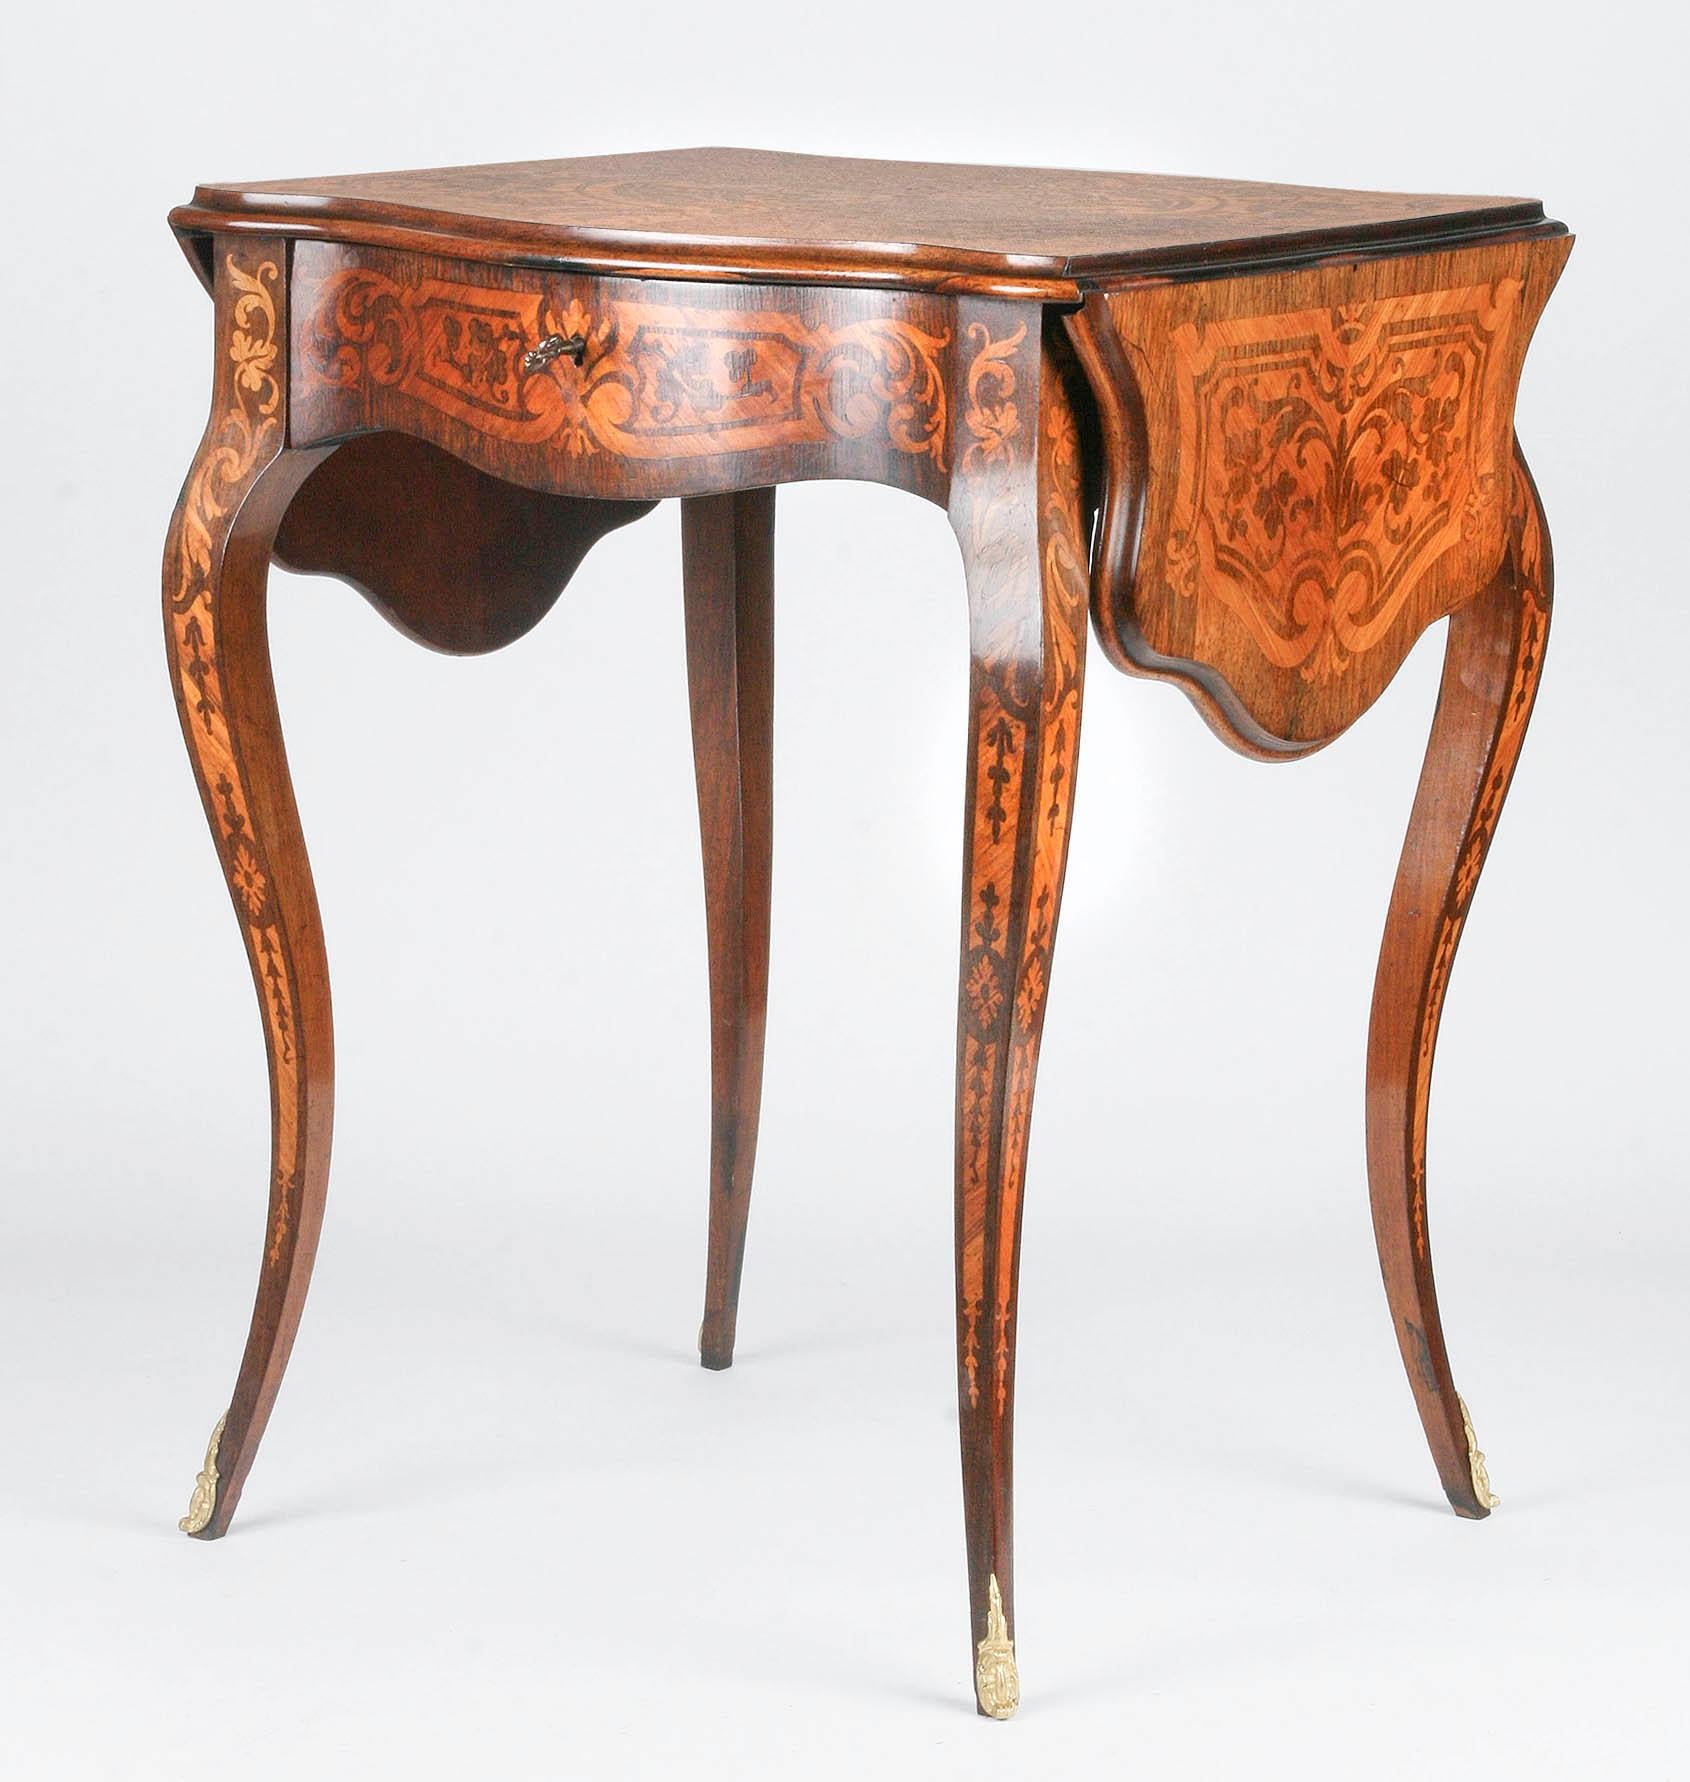 Charming drop-leaf table with symmetrical marquetry inlay.
The table has a drawer with key.
The top has a profiled edge, and the legs are finished with bronze gold-colored ornaments.
The whole is in very nice condition.

Measures: Width fold in 59